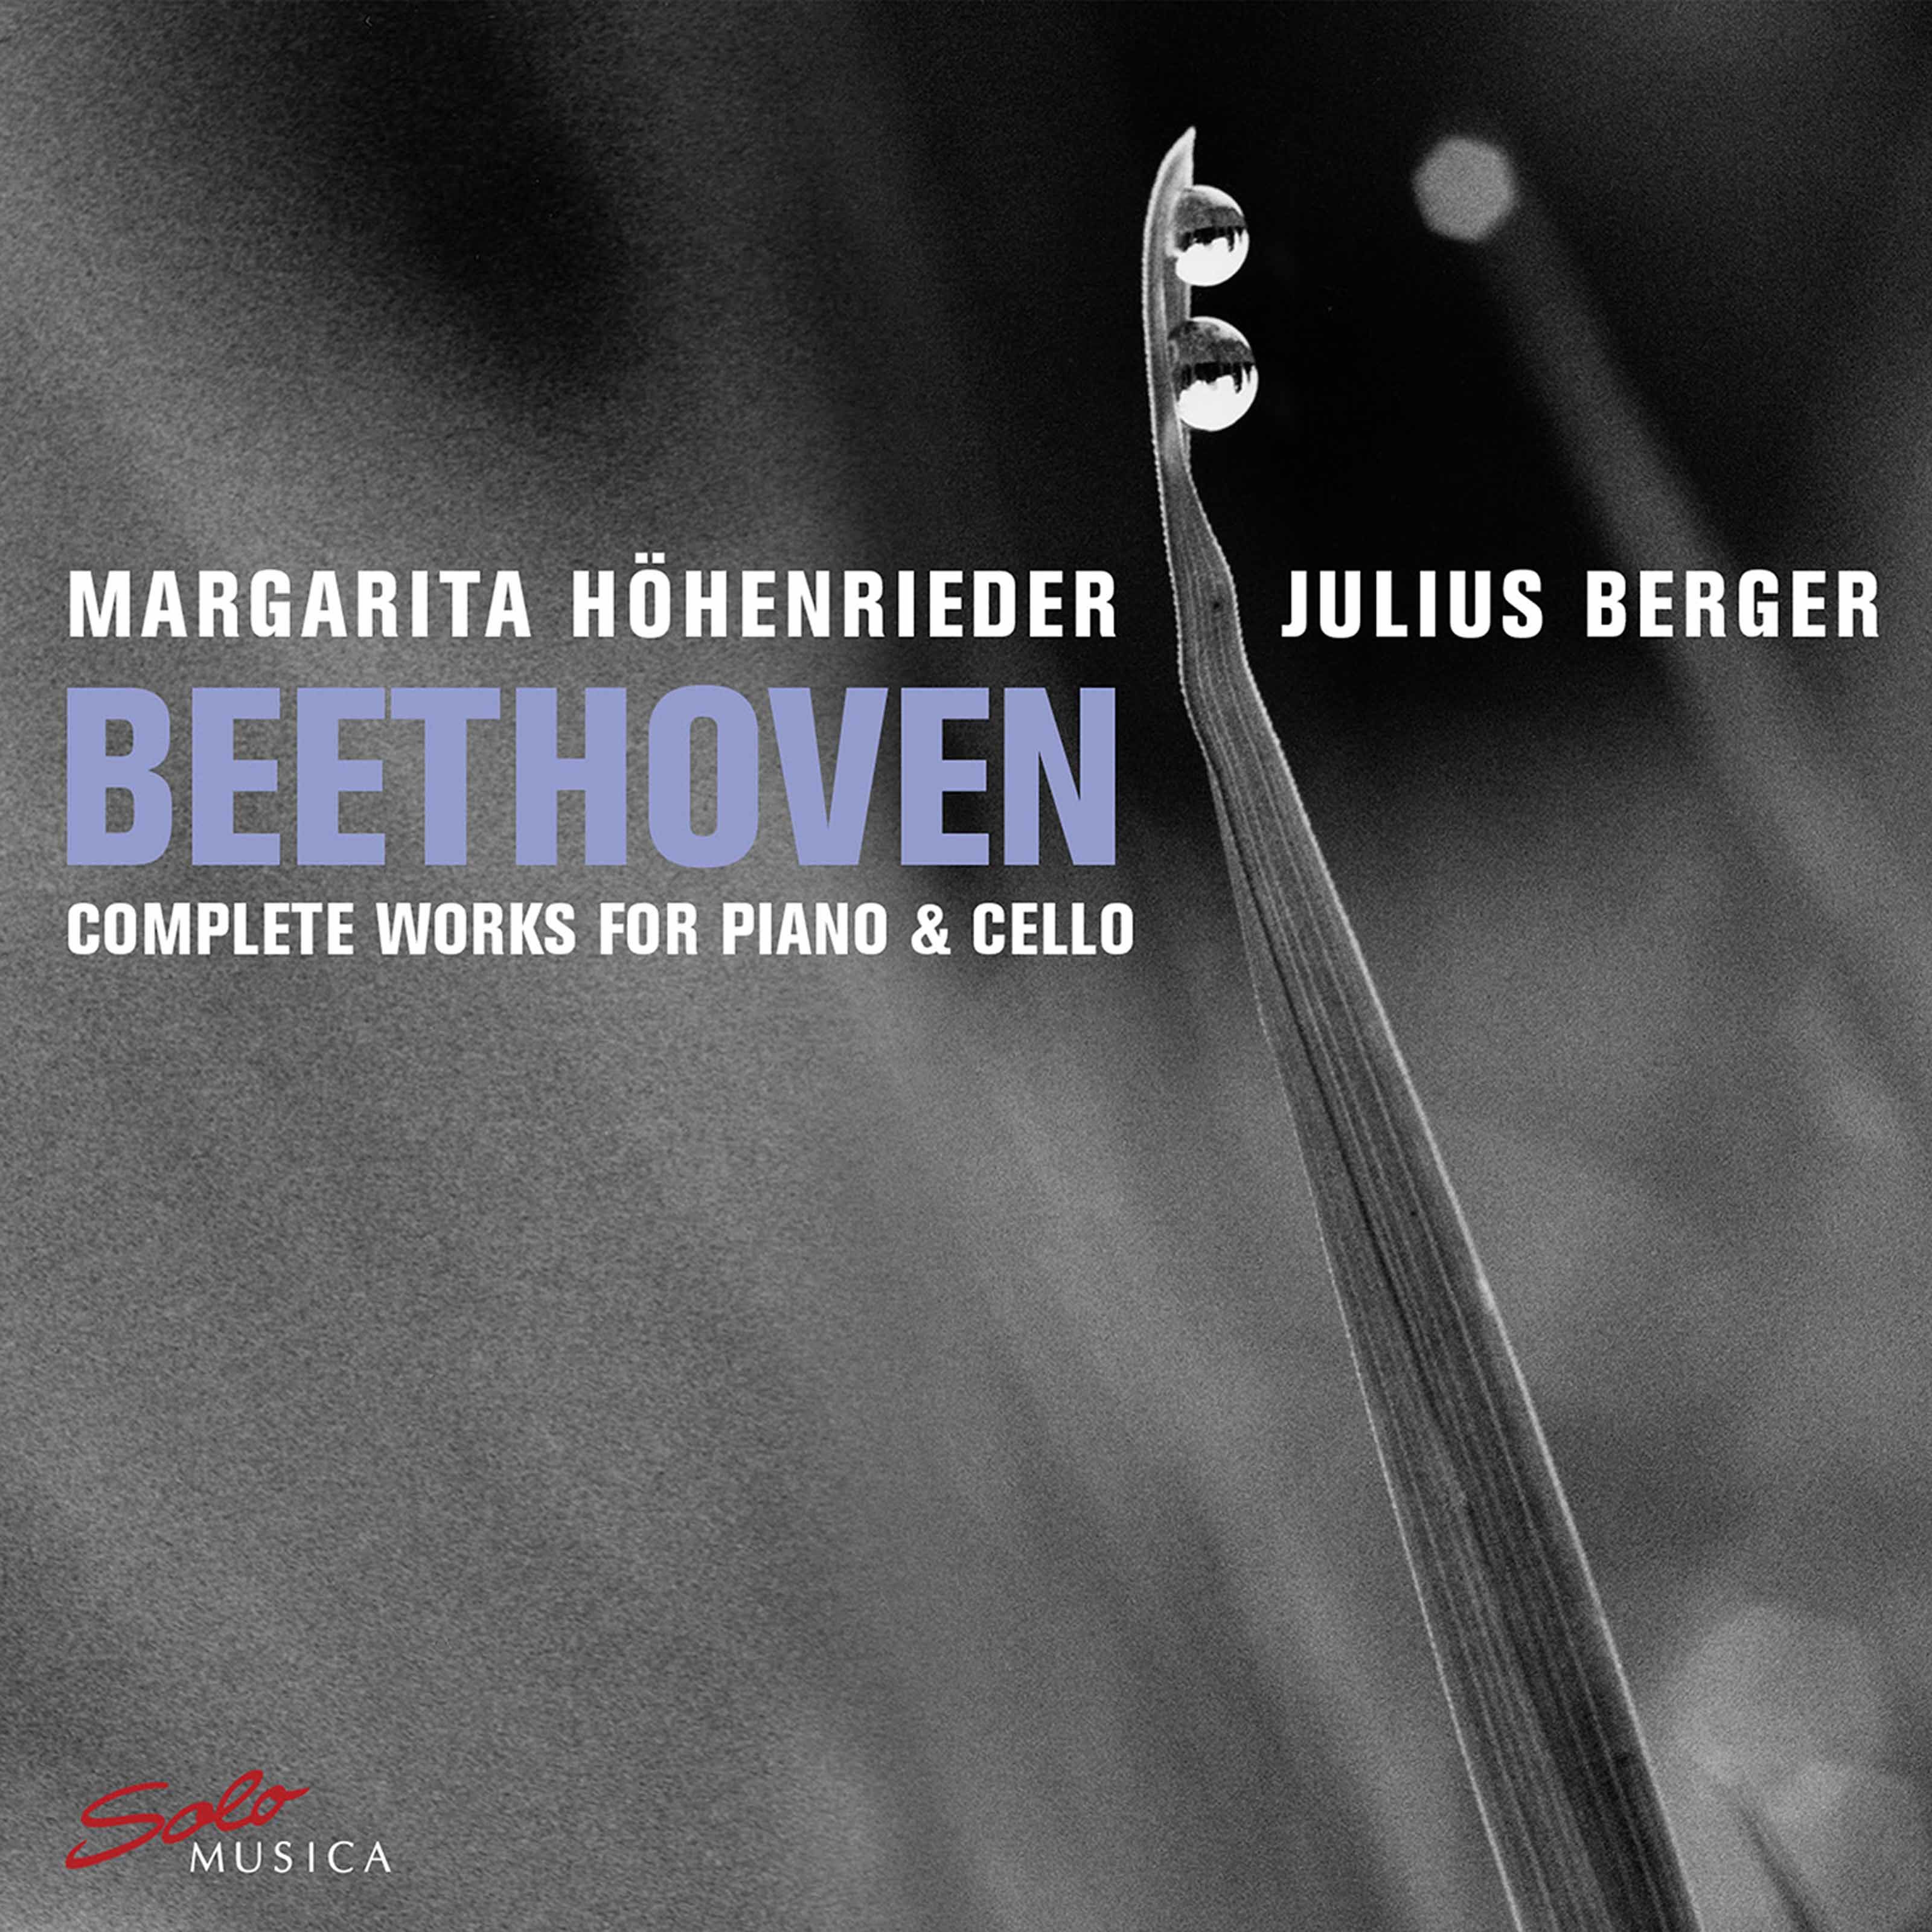 Margarita Hohenrieder, Julius Berger - Beethoven Complete Works for Piano & Cello (2020) [FLAC 24bit/96kHz]